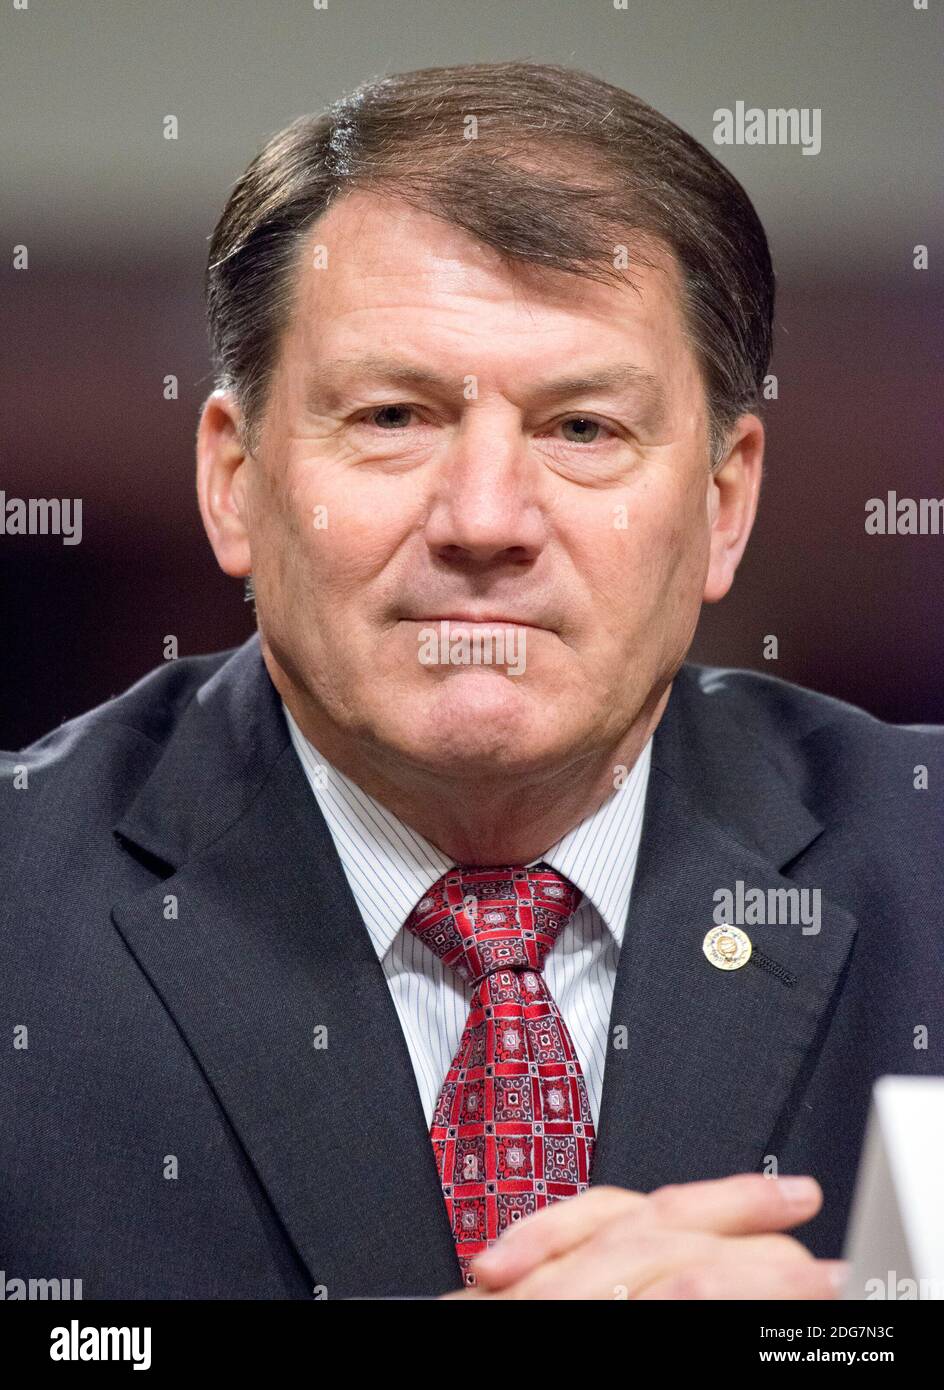 United States Senator Mike Rounds (Republican of South Dakota) appears before the US Senate Armed Services Committee in support of the nomination of former US Representative Heather A. Wilson (Republican of New Mexico) to be Secretary of the Air Force on Capitol Hill in Washington, DC, USA? on Thursday, March 30, 2017. Photo by Ron Sachs/CNP/ABACAPRESS.COM Stock Photo